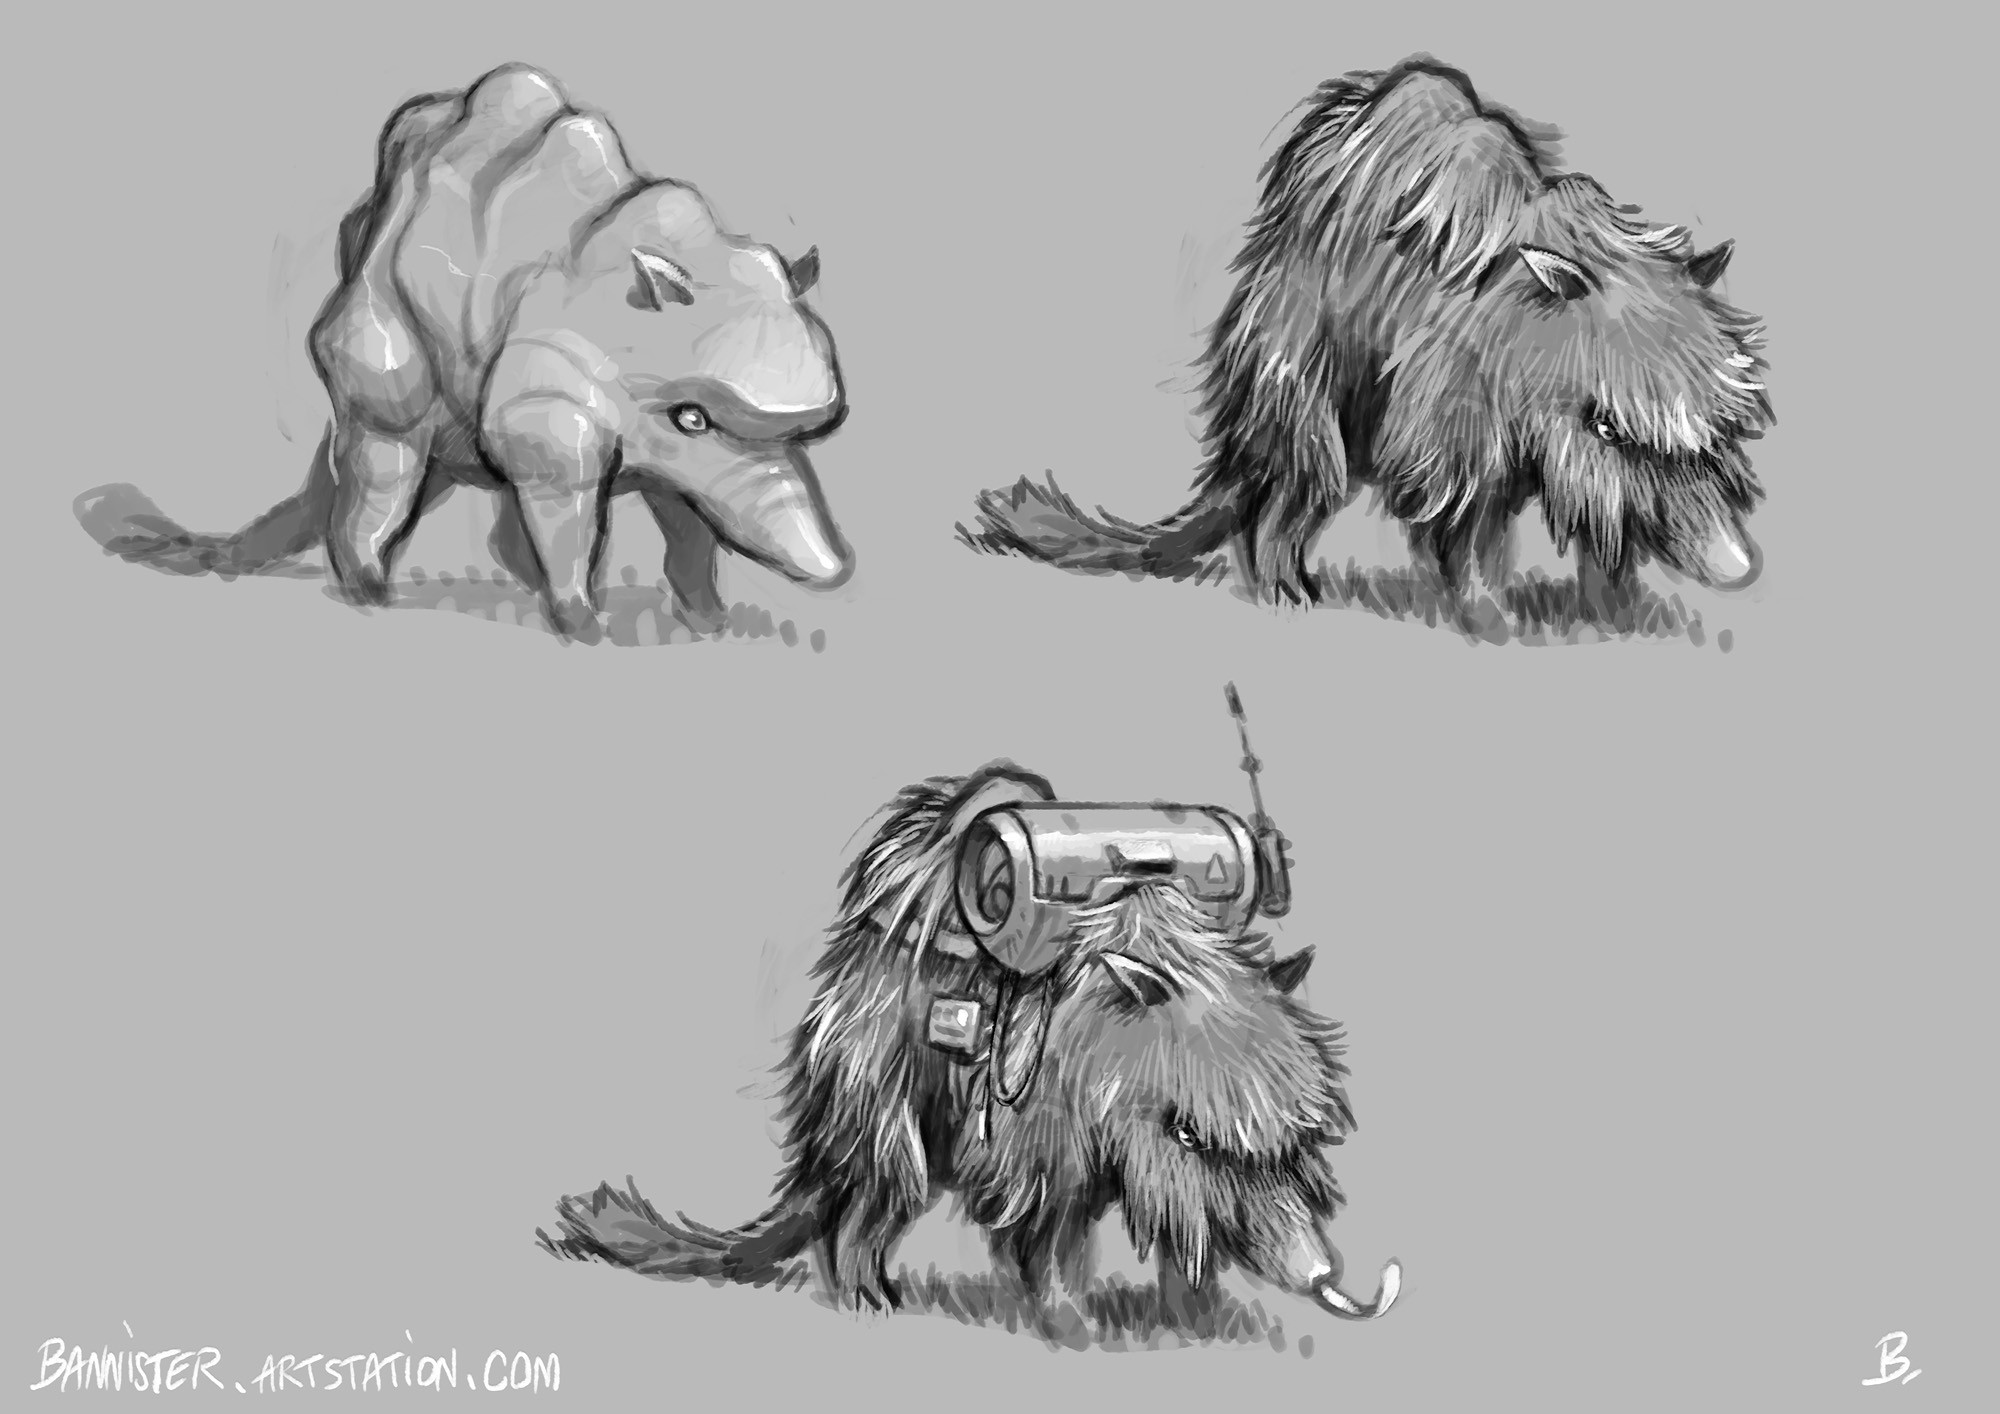 Fur creature concept and "anatomy"